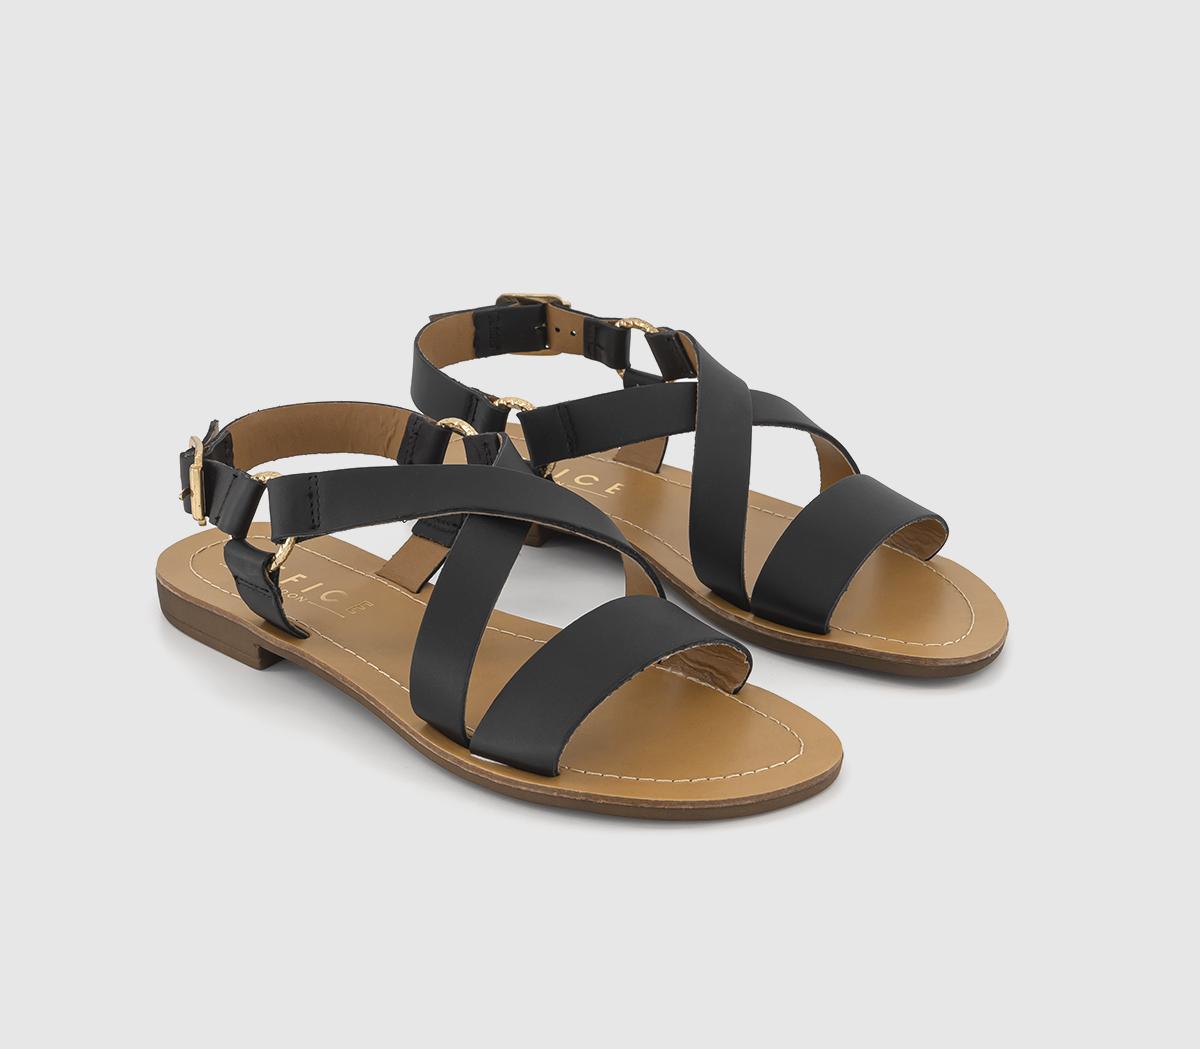 OFFICE Sequence Cross Over Flat Sandals Black Leather - Women’s Sandals